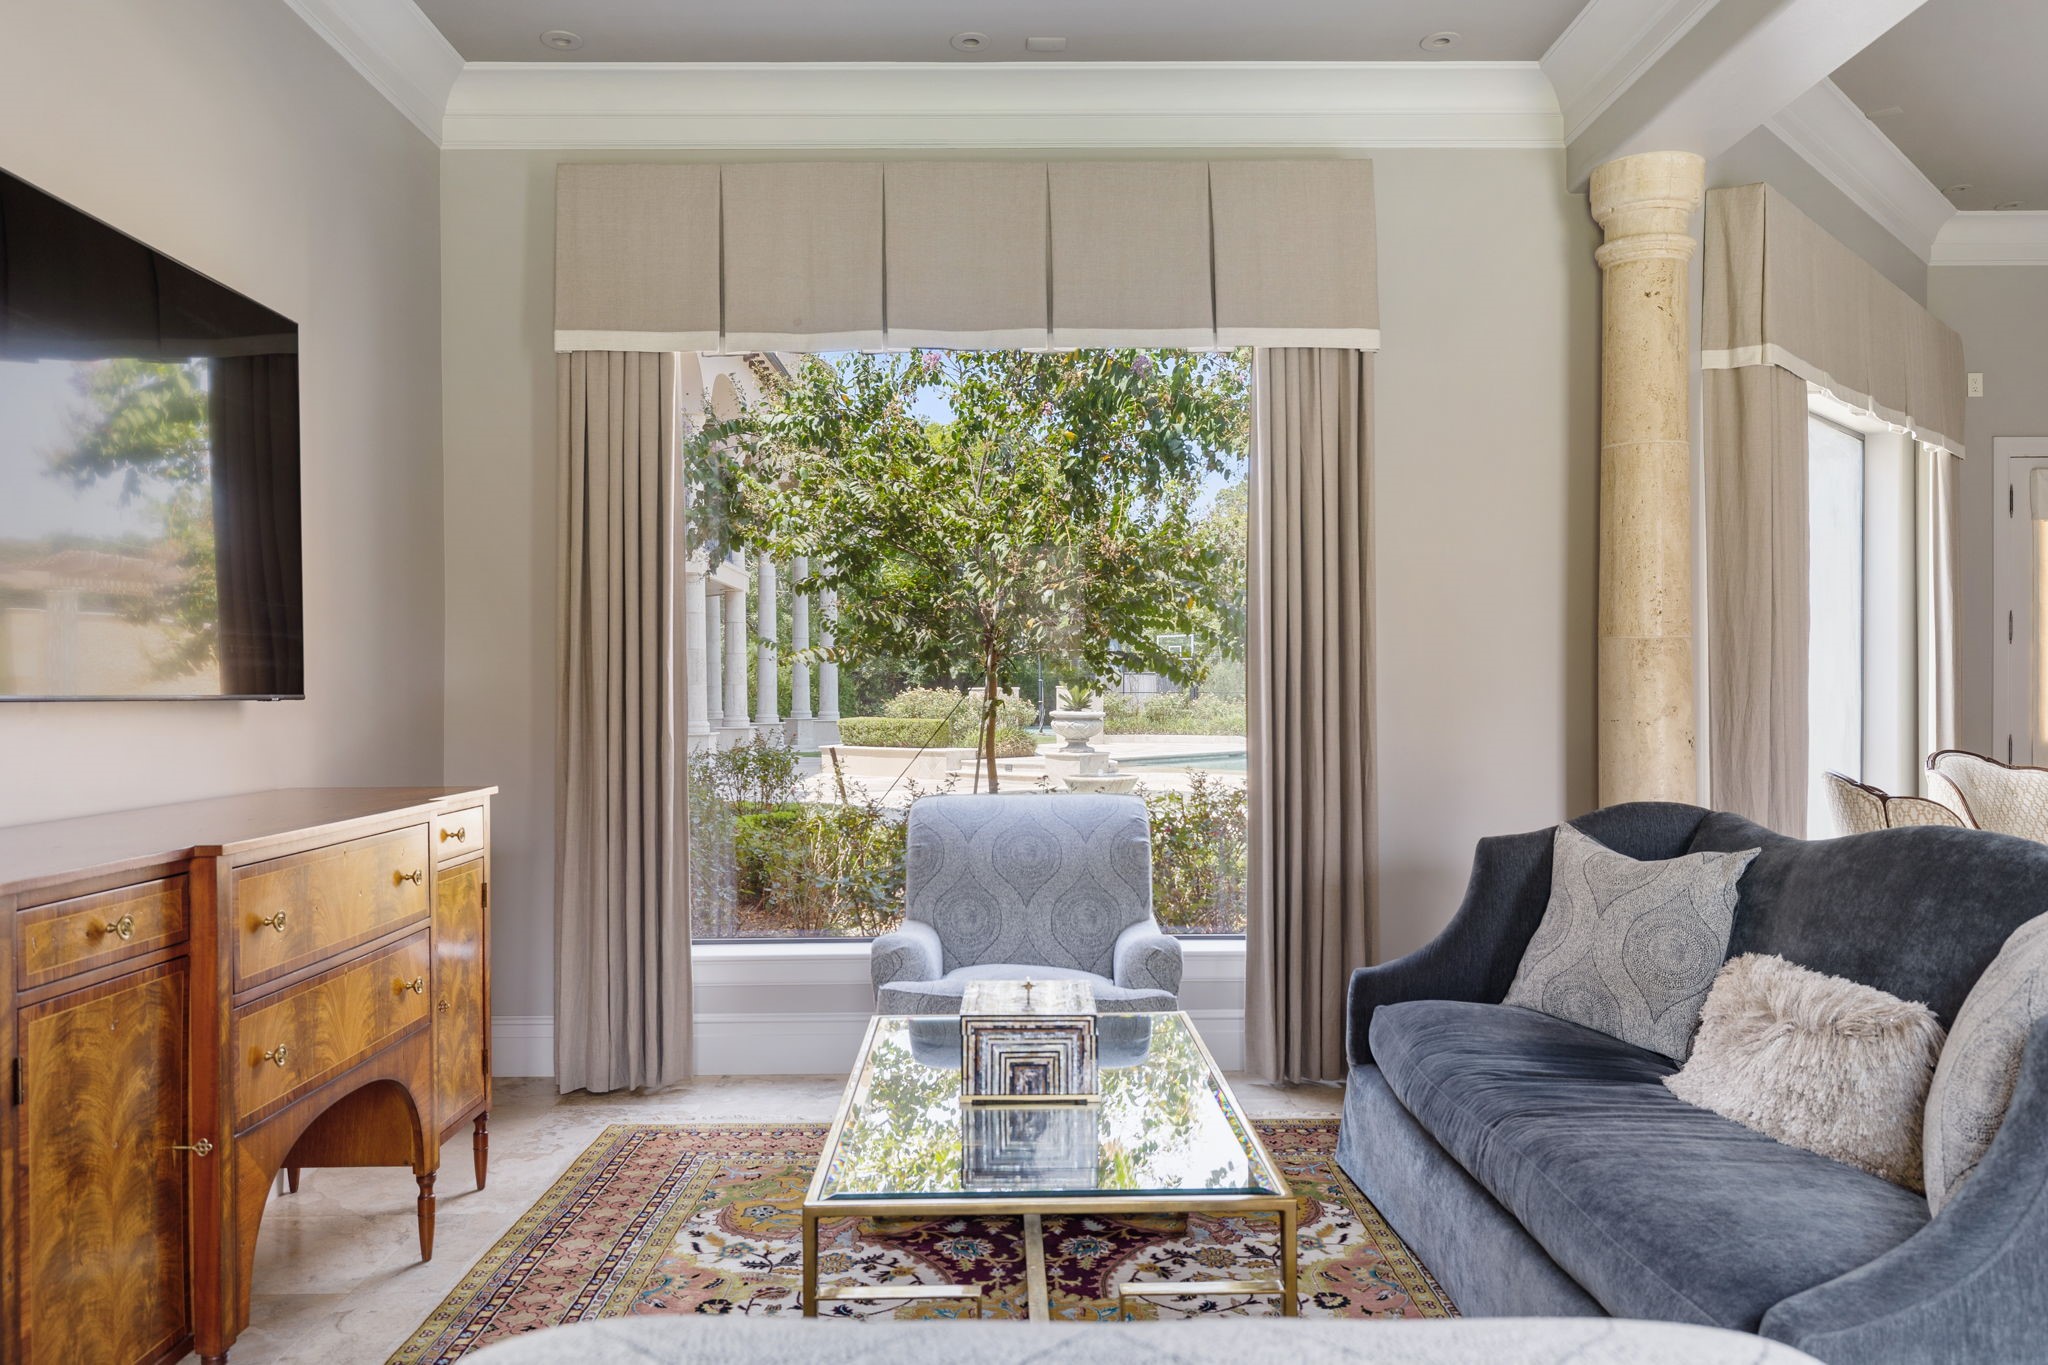 The Athenaeum in the Suite provides a comfortable reading nook, or a place to watch your favorite gothic love story. Above is a tray ceiling fortified by stone columns, and a seamless view of the lush gardens.